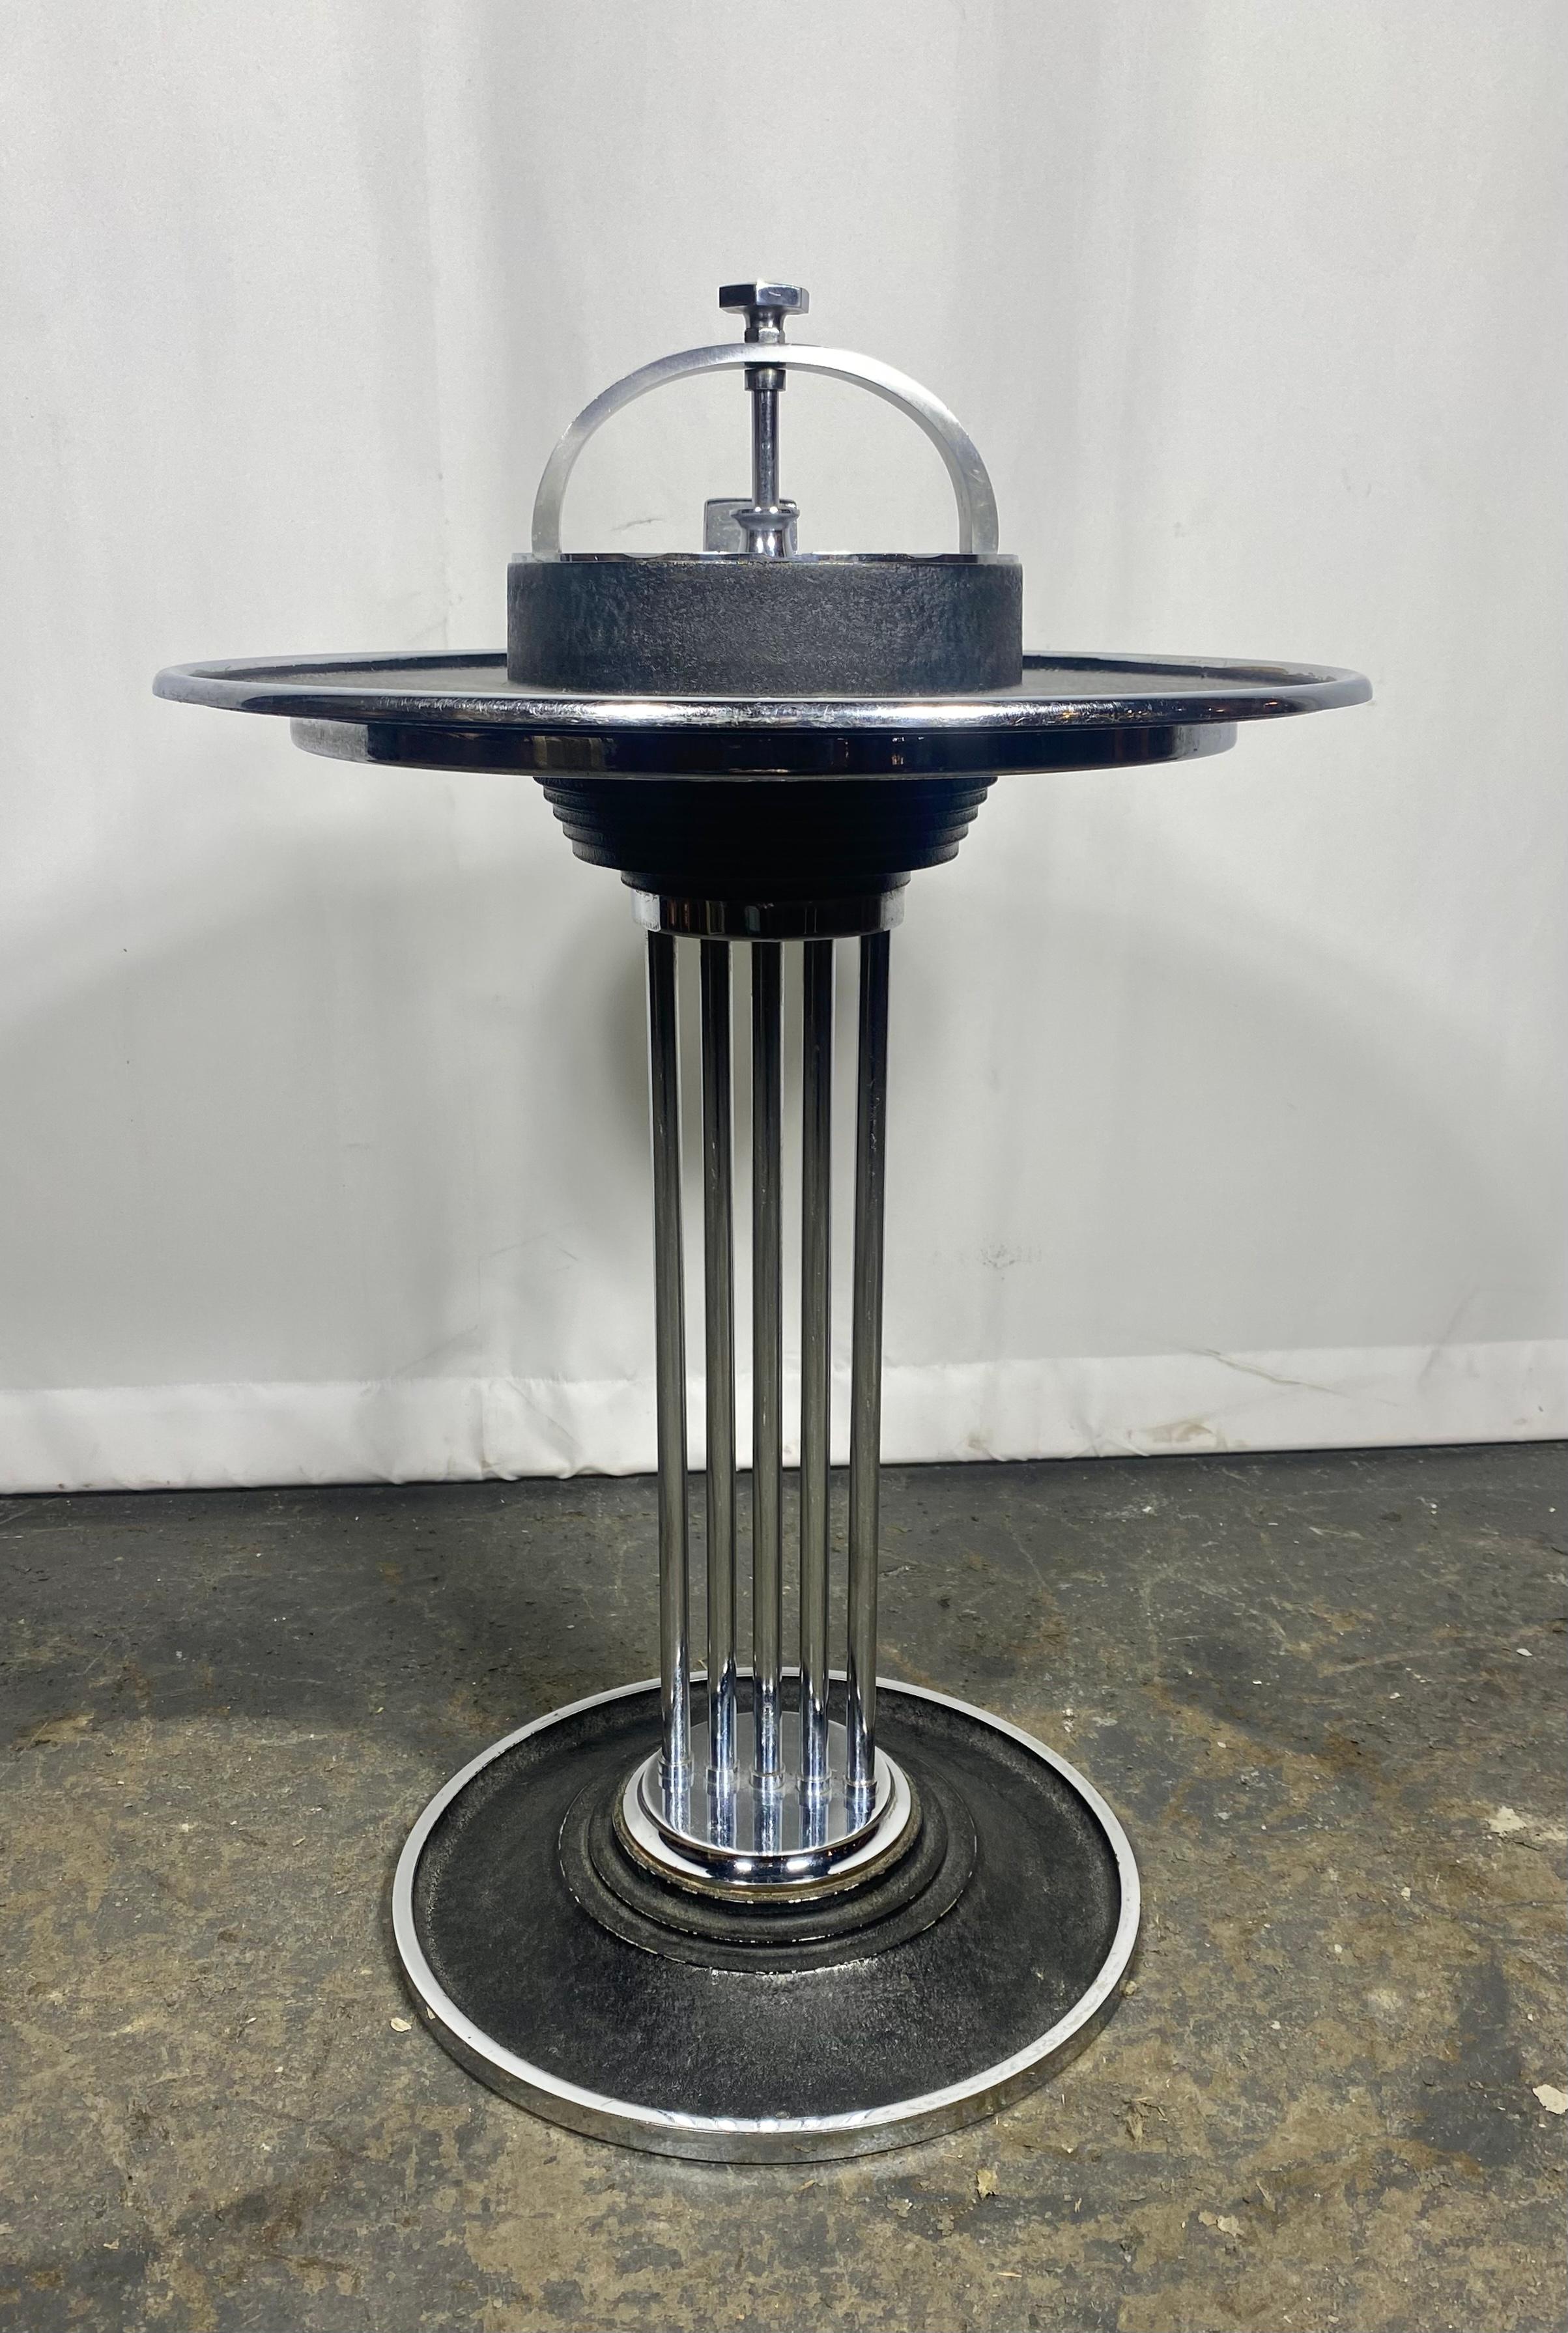 Climax Streamline 1930s American Art Deco Train Car Ashtray and Drink Stand In Good Condition For Sale In Buffalo, NY